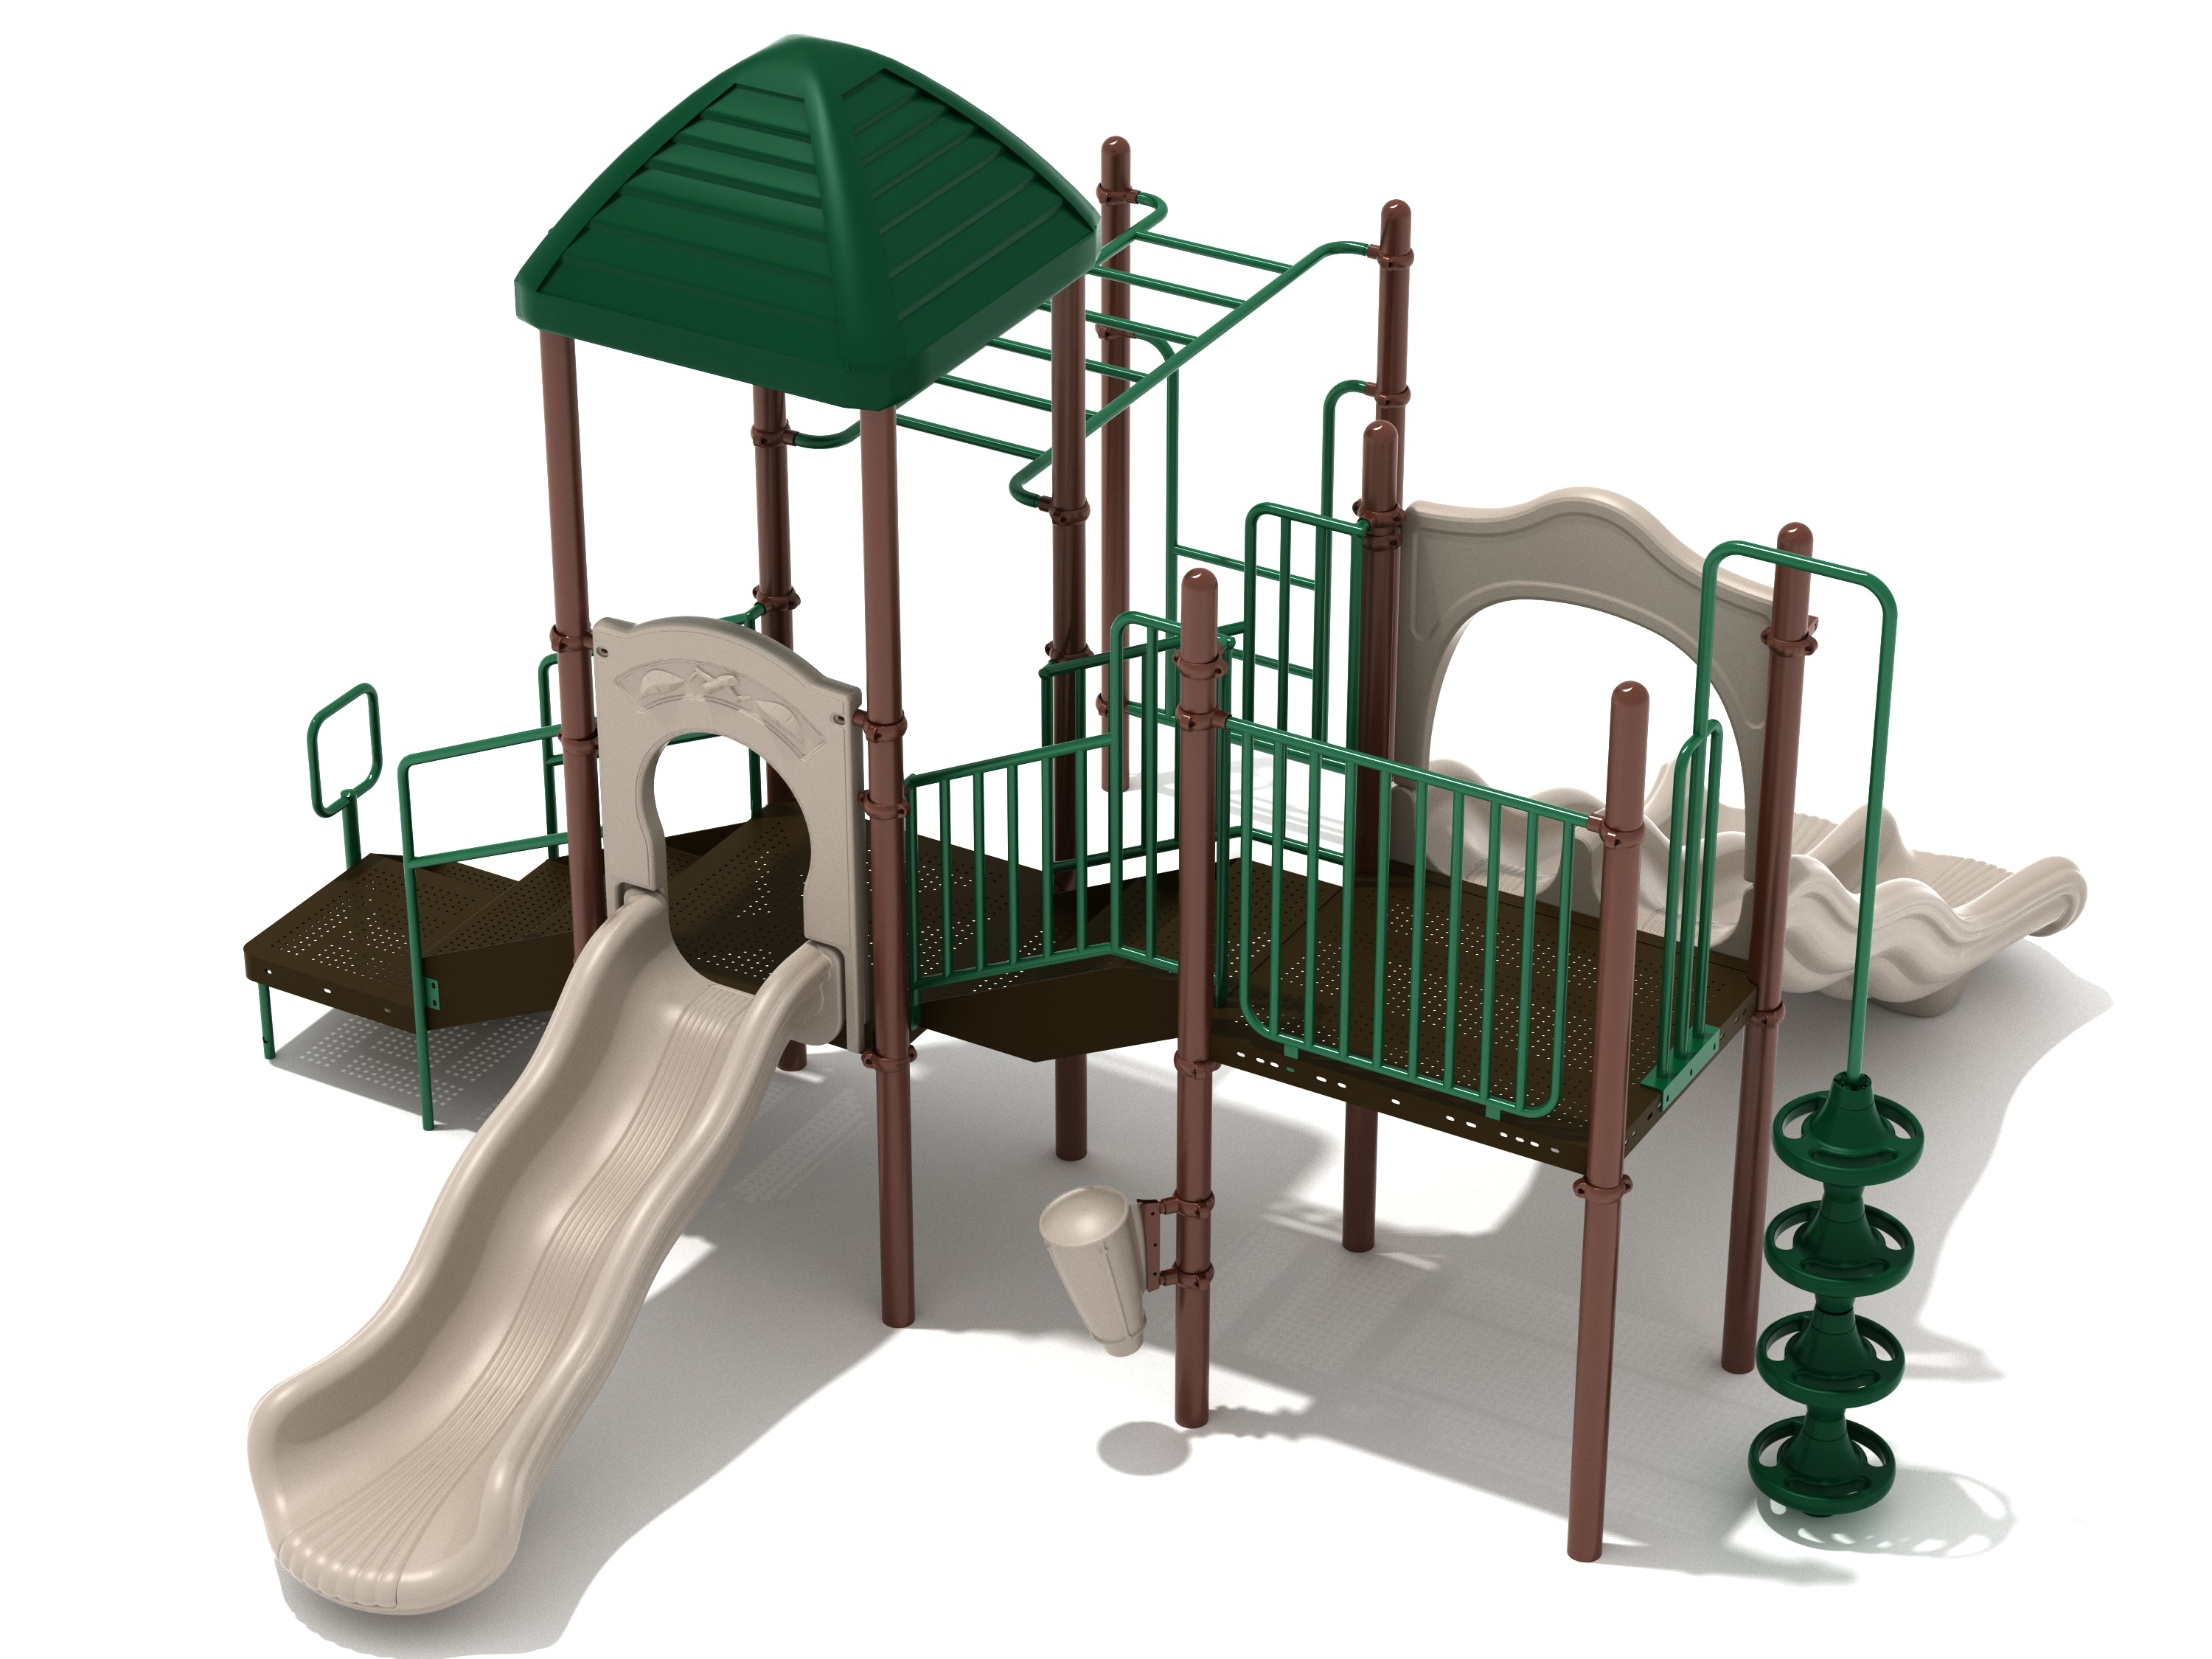 Sunset Harbor Play System Neutral Colors